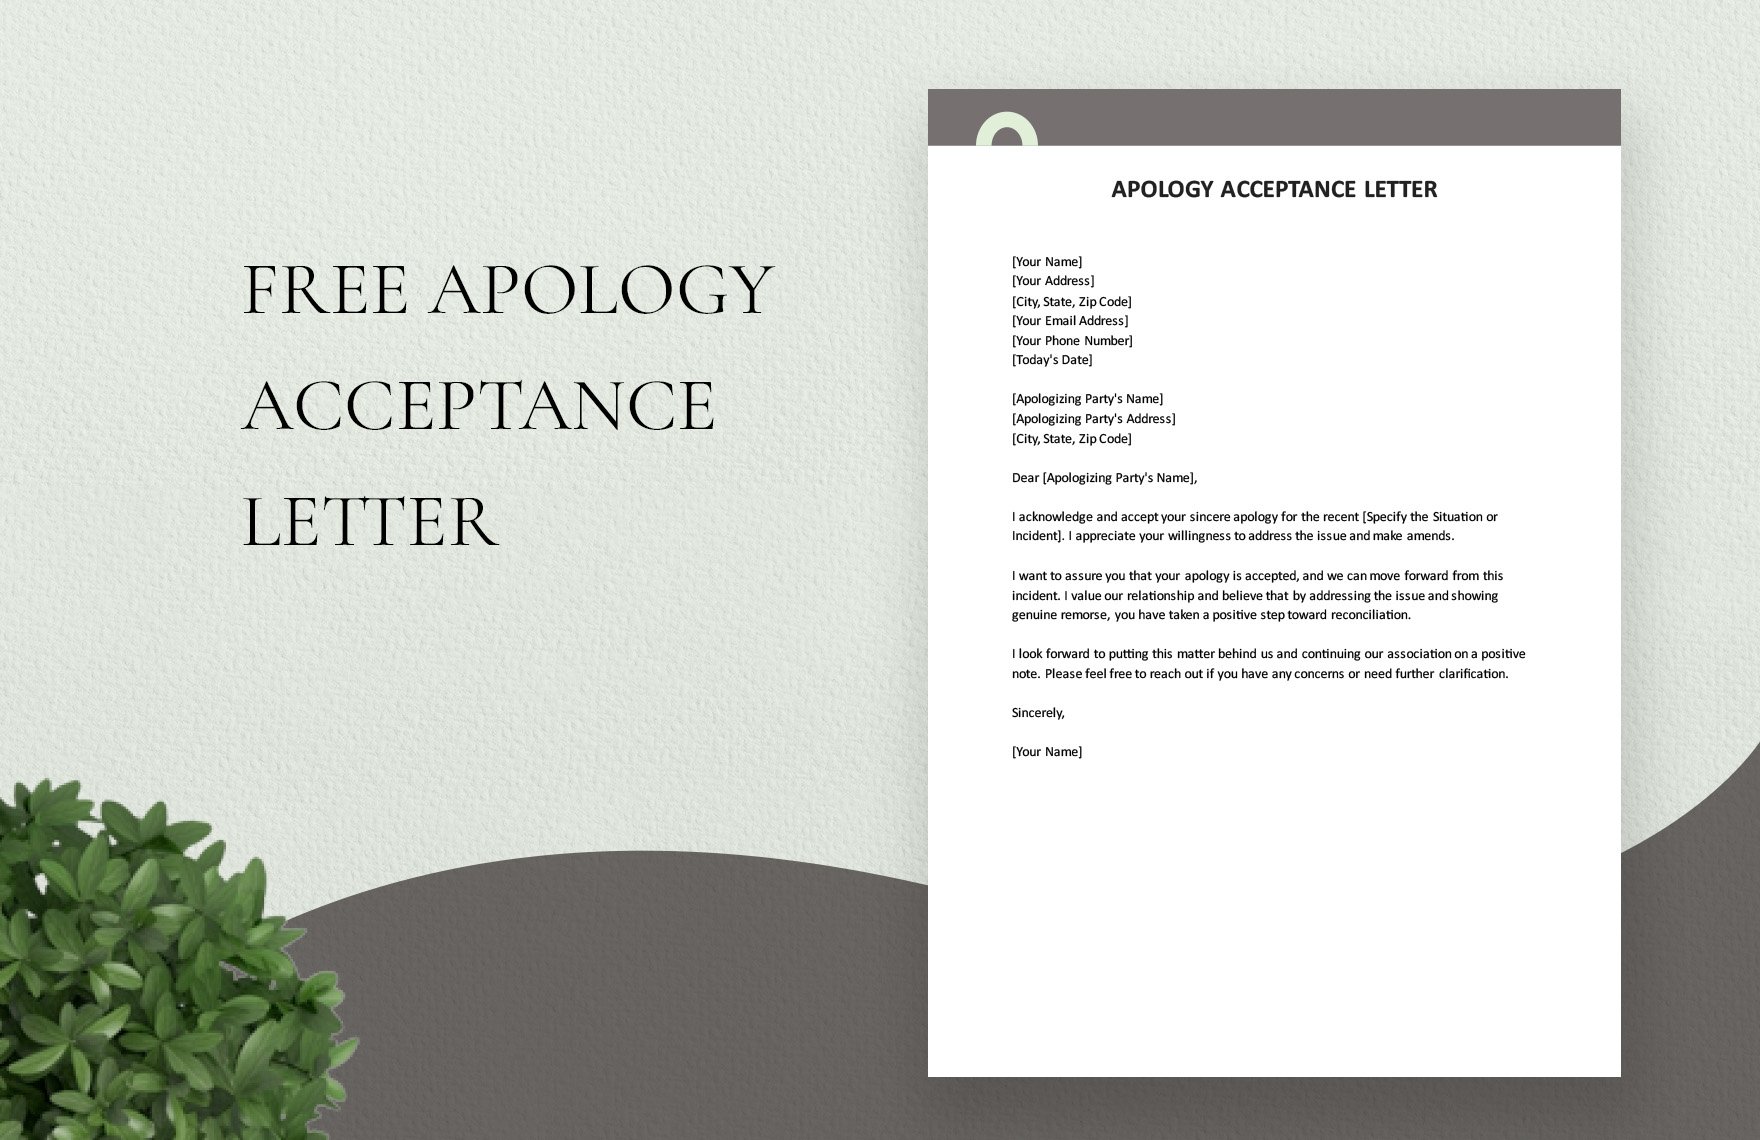 Apology Acceptance Letter